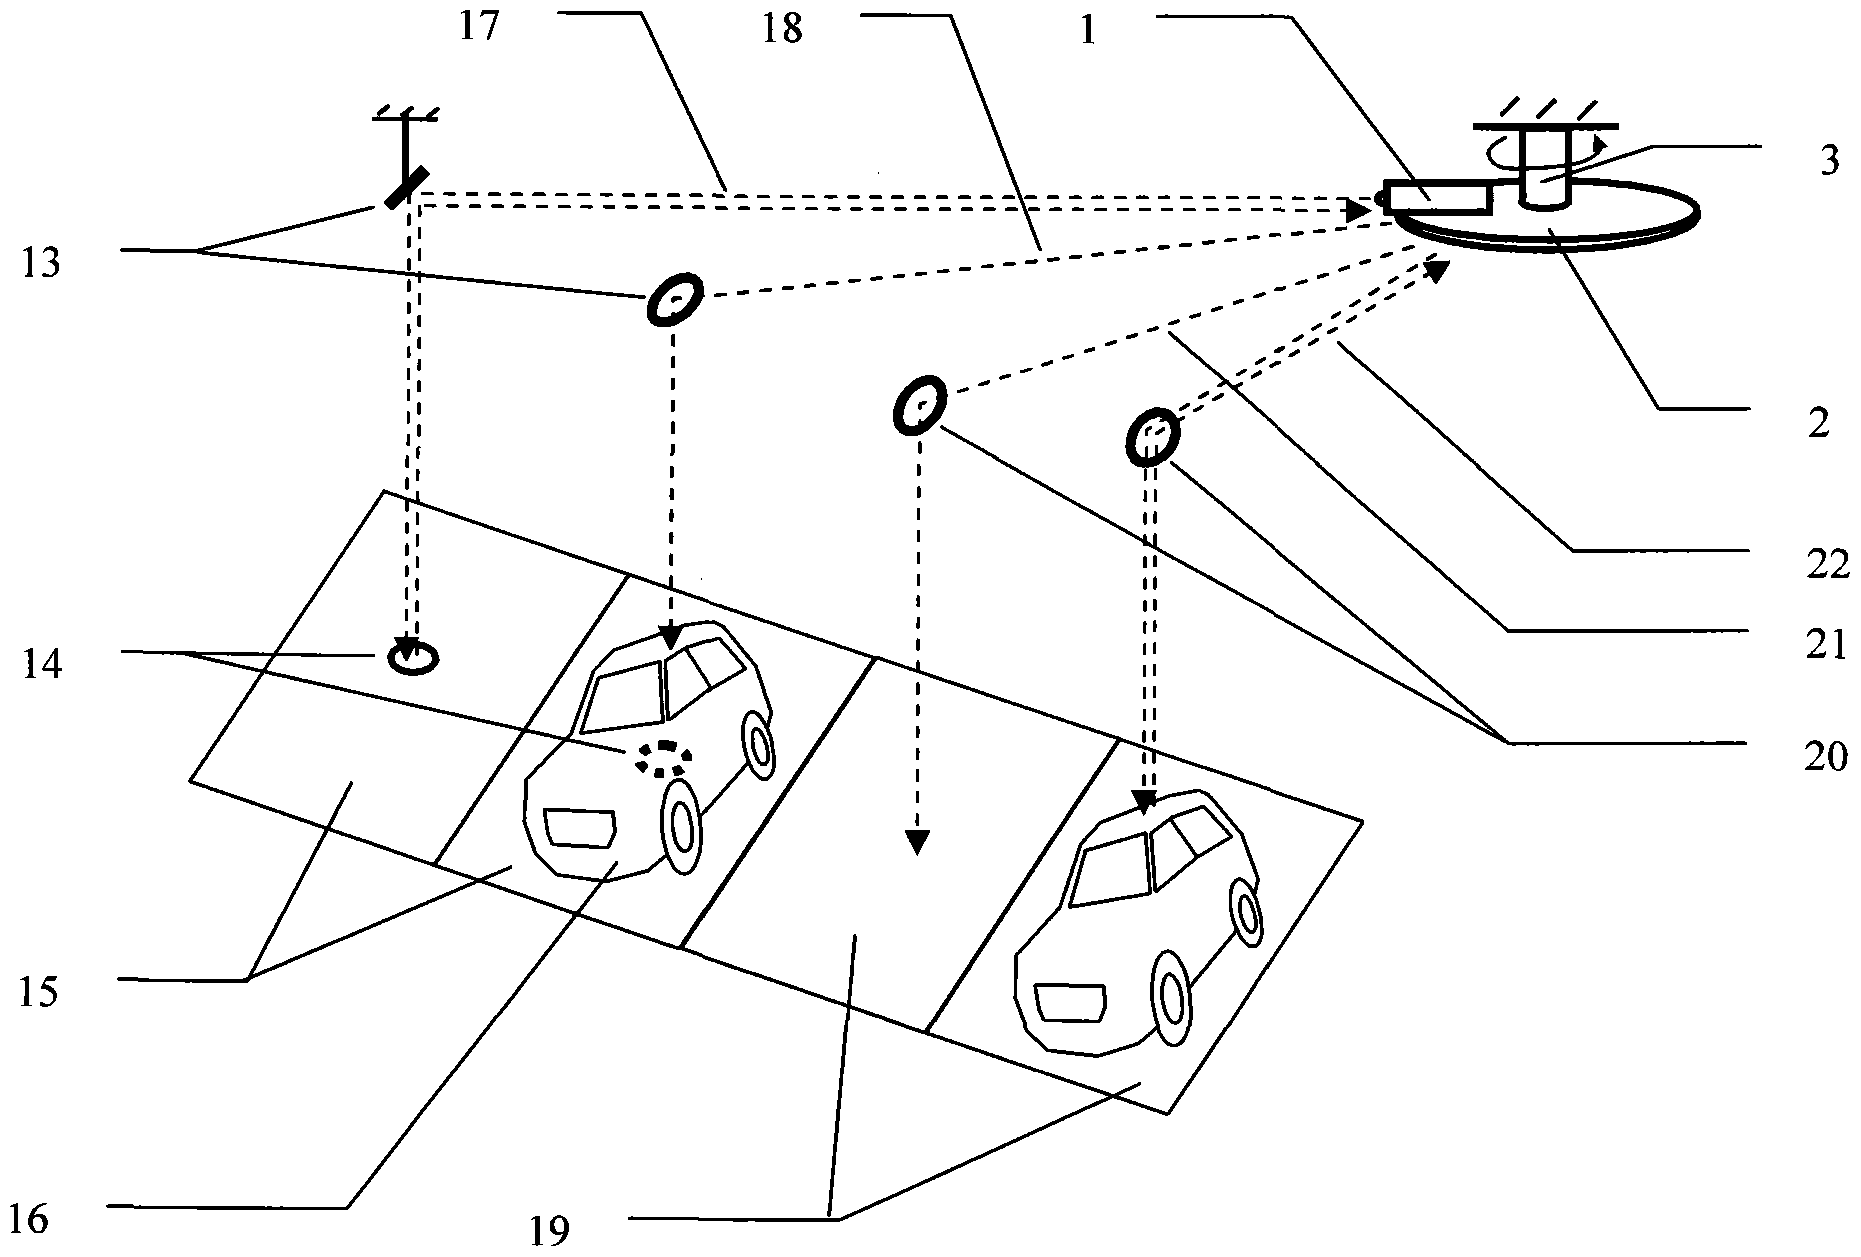 Multi-stall laser detection device